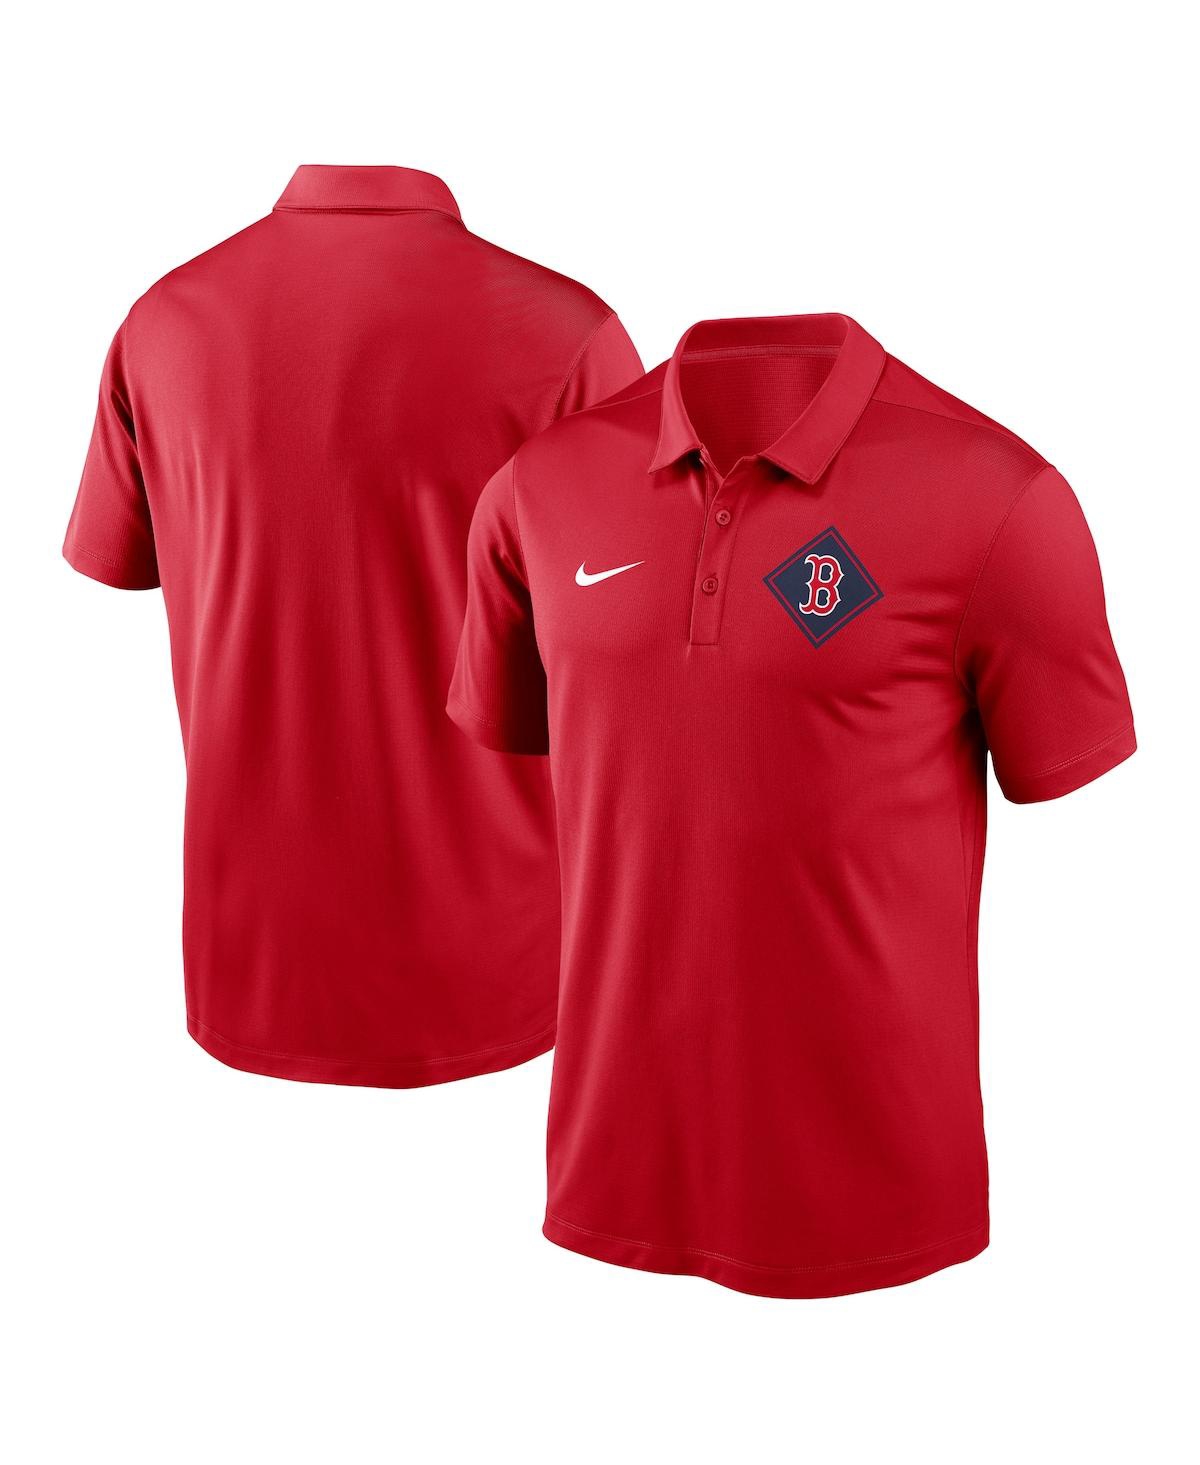 Men's Nike Red Boston Red Sox Diamond Icon Franchise Performance Polo Shirt - Red